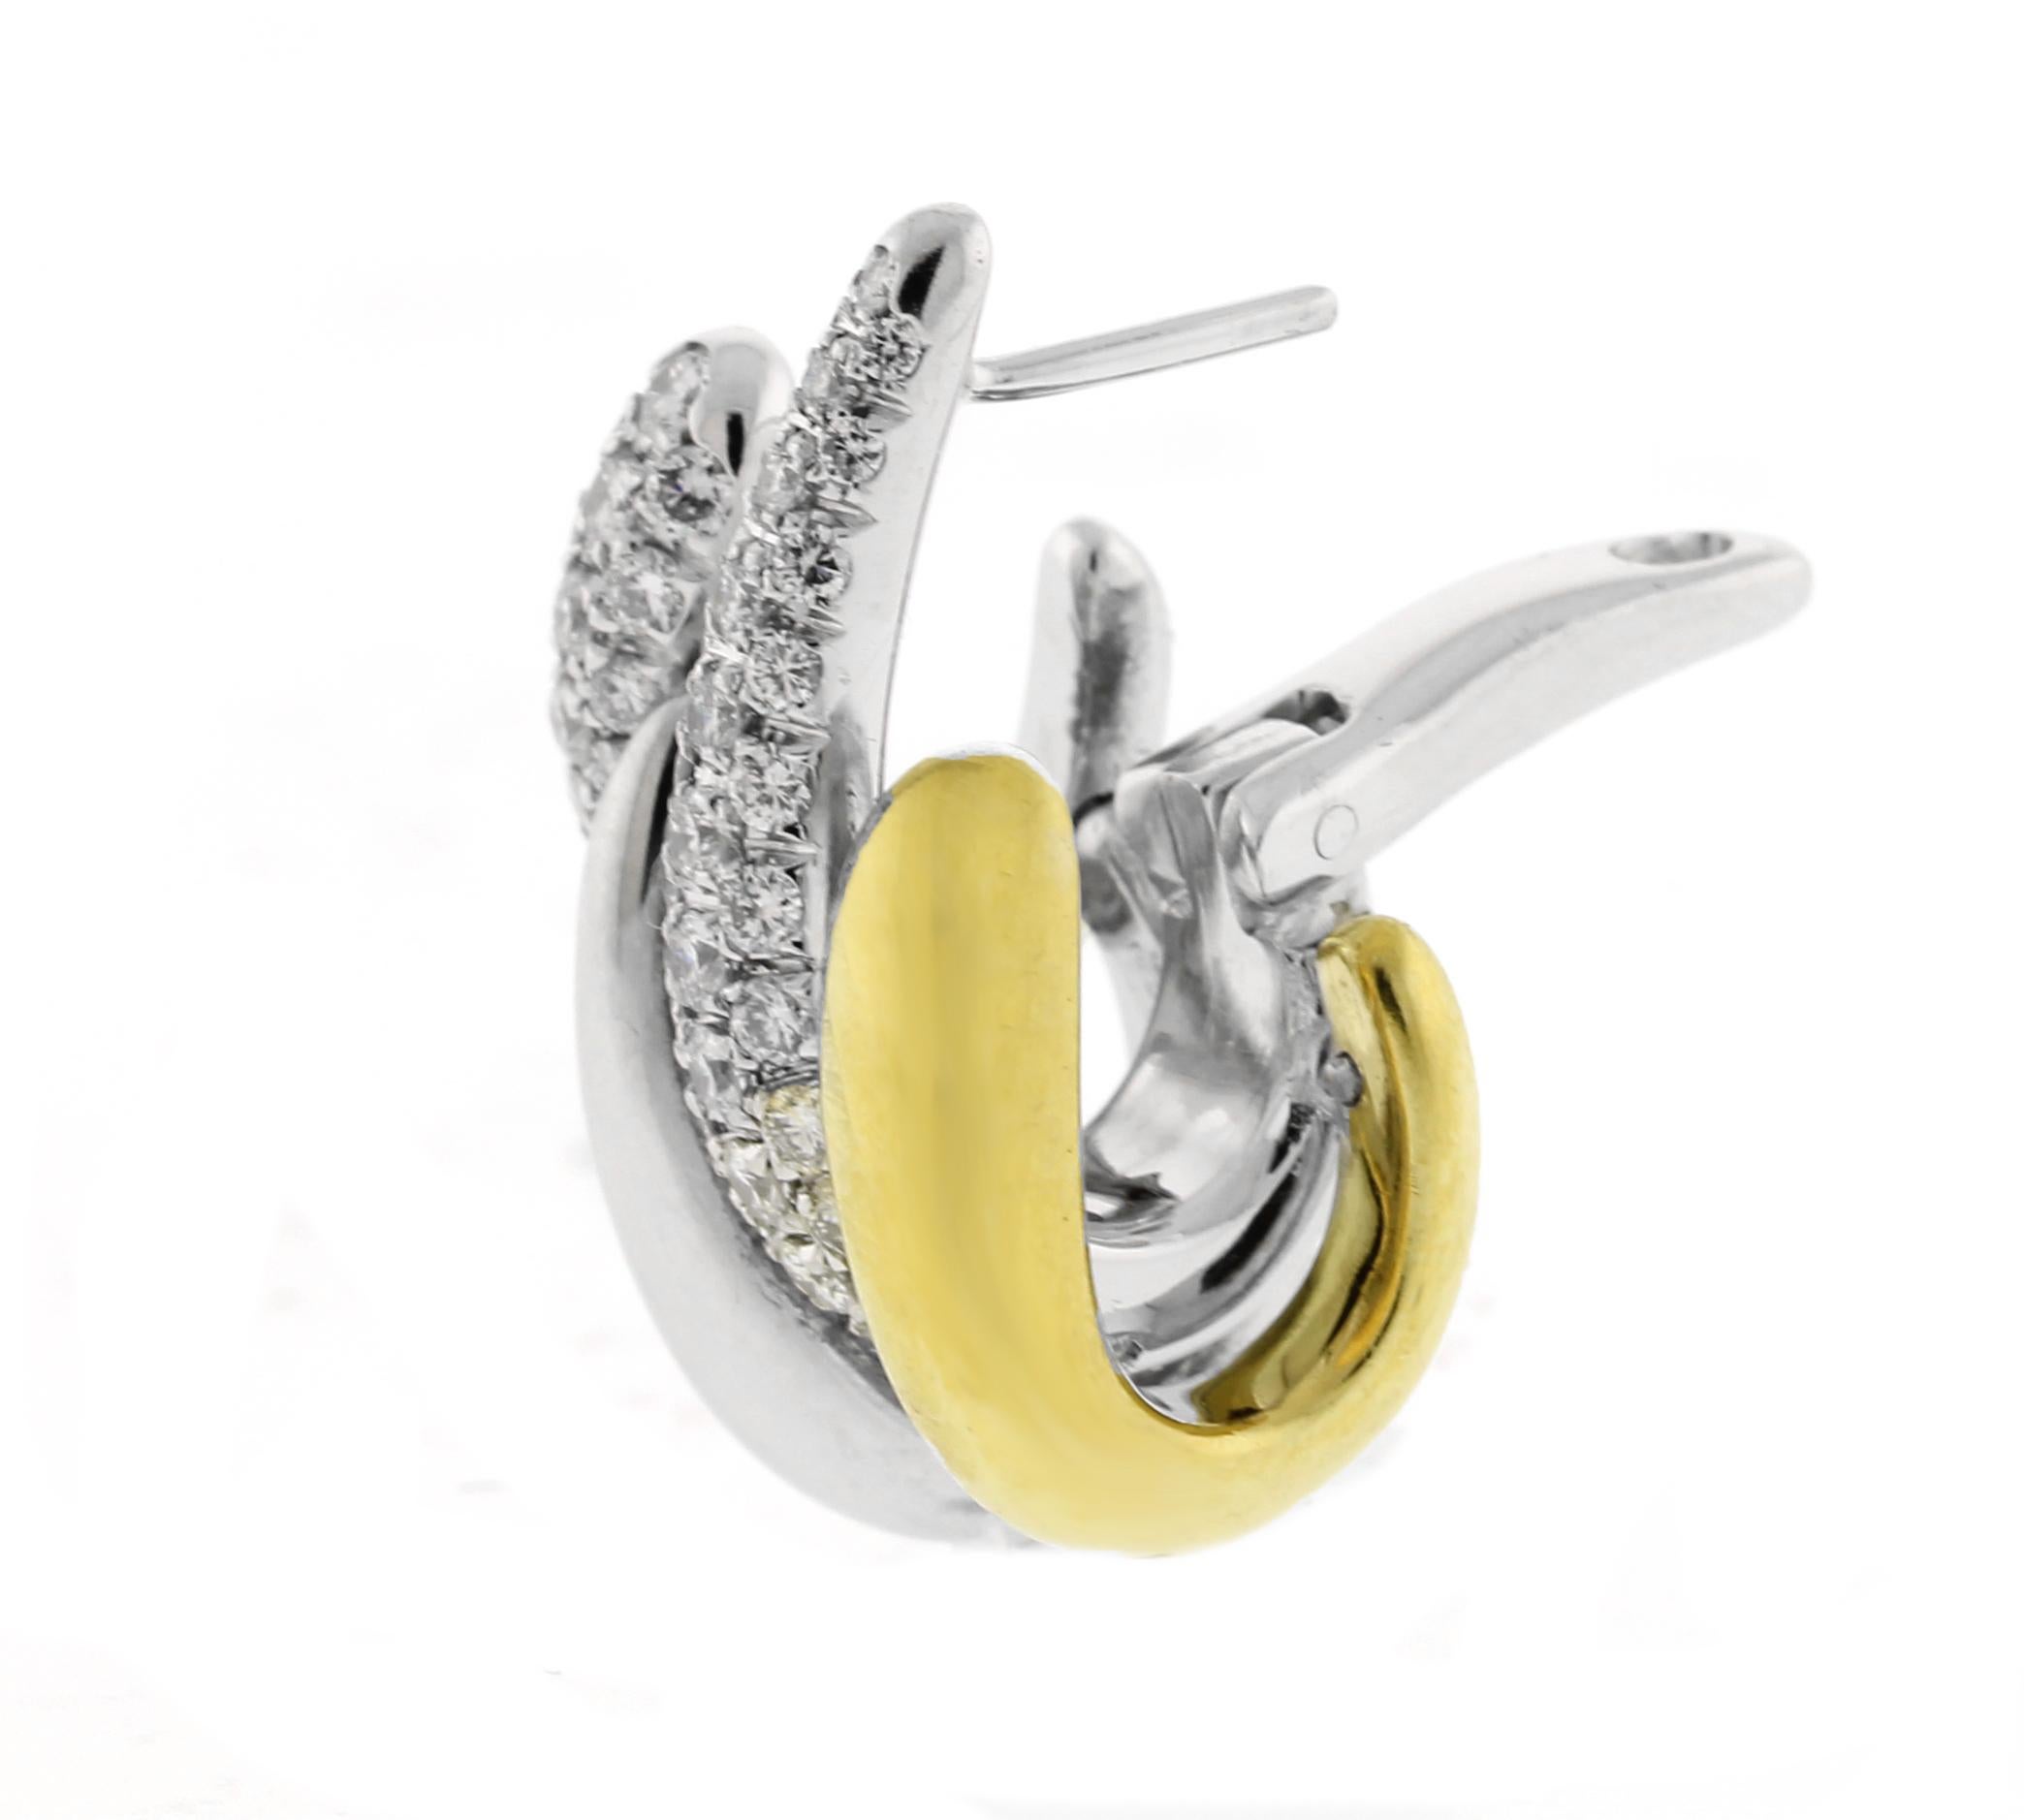 From Pomellato, these earrings are great for any occasion.
♦ Designer: Pomellato
♦ Metal: 18 karat yellow gold and white gold
♦ Gemstone: 136Diamonds=1.00cts
♦ Circa: 2010
♦ Length: 7/8inch
♦Width: 1/2inch
♦ Packaging: Pampillonia presentation box
♦